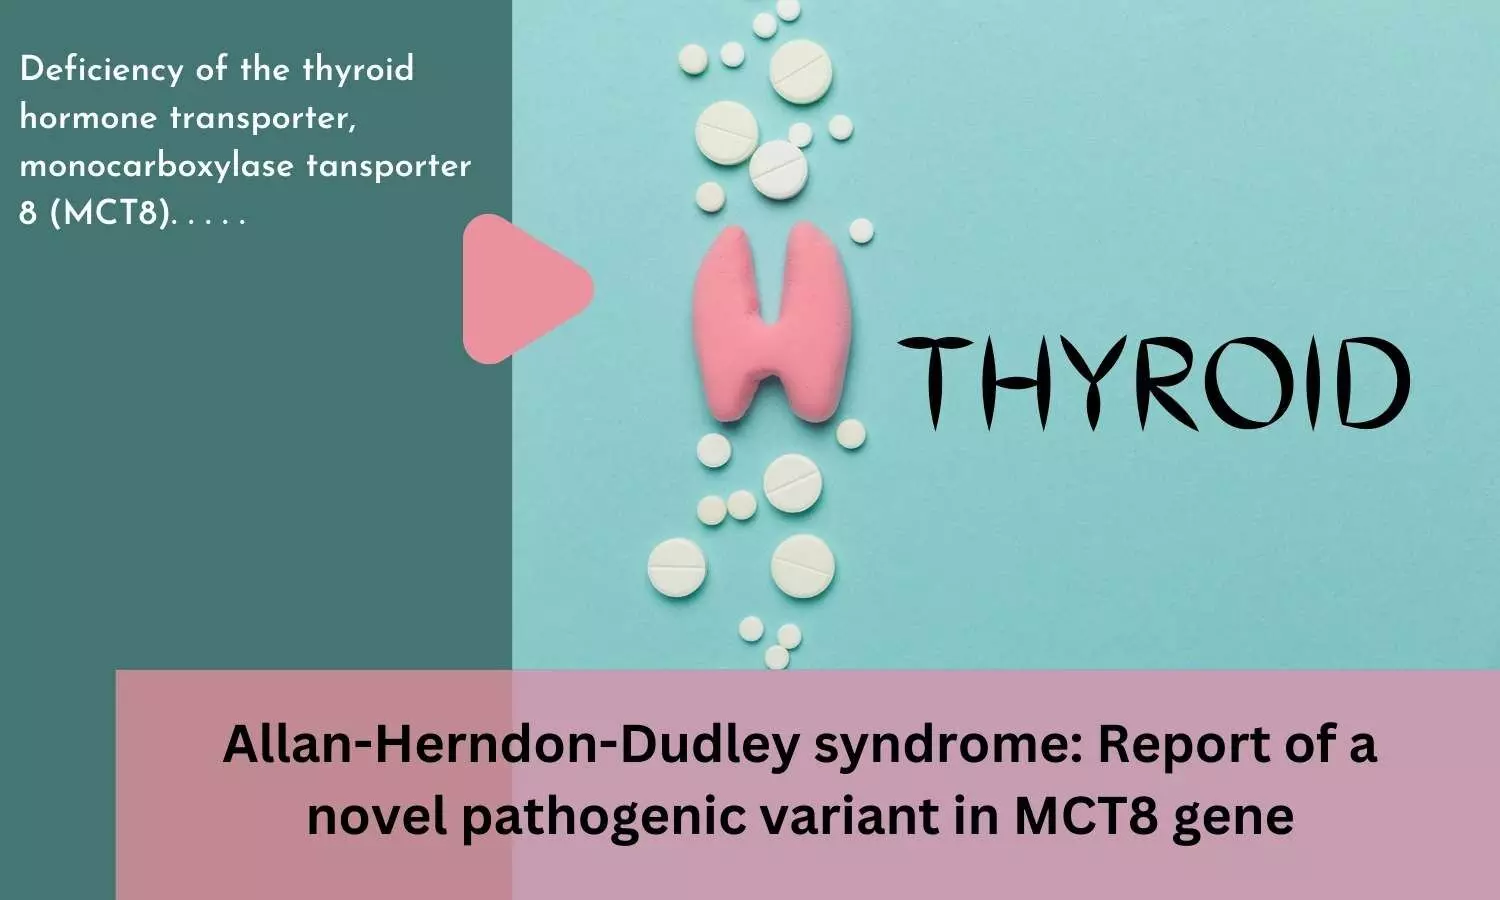 Journal Club - Allan Herndon Dudley syndrome: Report of a novel pathogenic variant in MCT8 gene